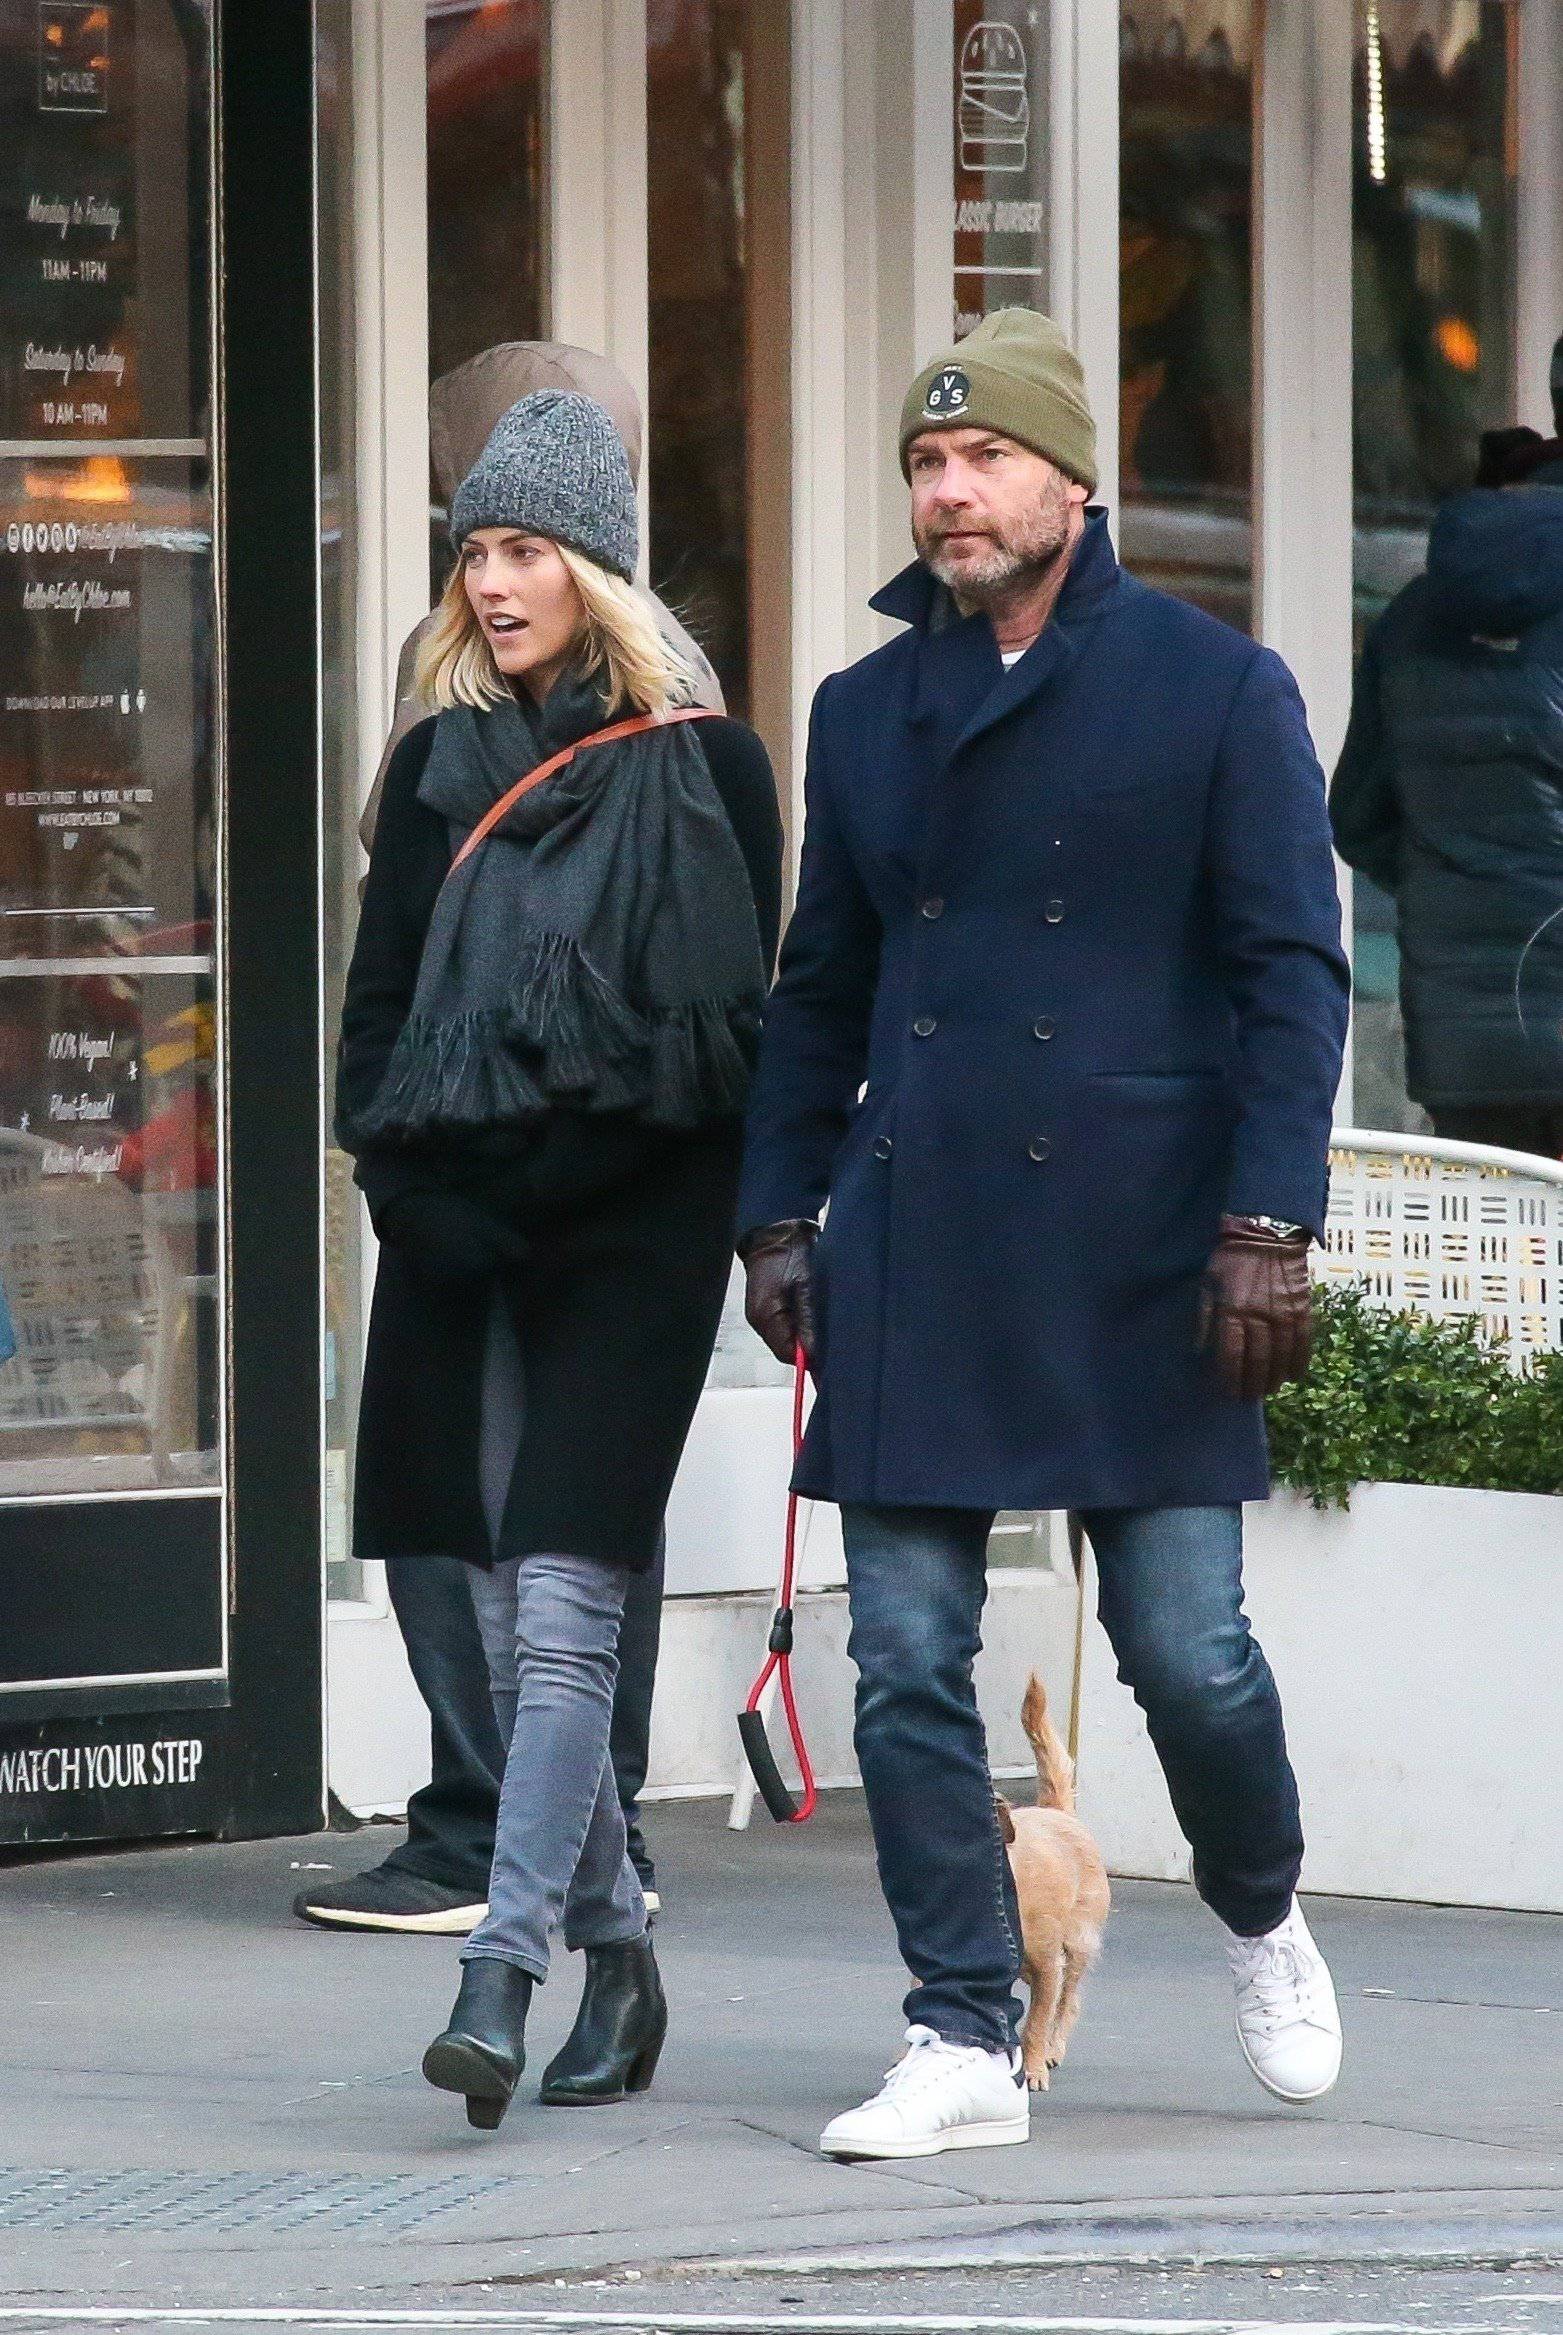 *EXCLUSIVE* Liev Schreiber and girlfriend Taylor Neisen take the dog for a walk in Soho